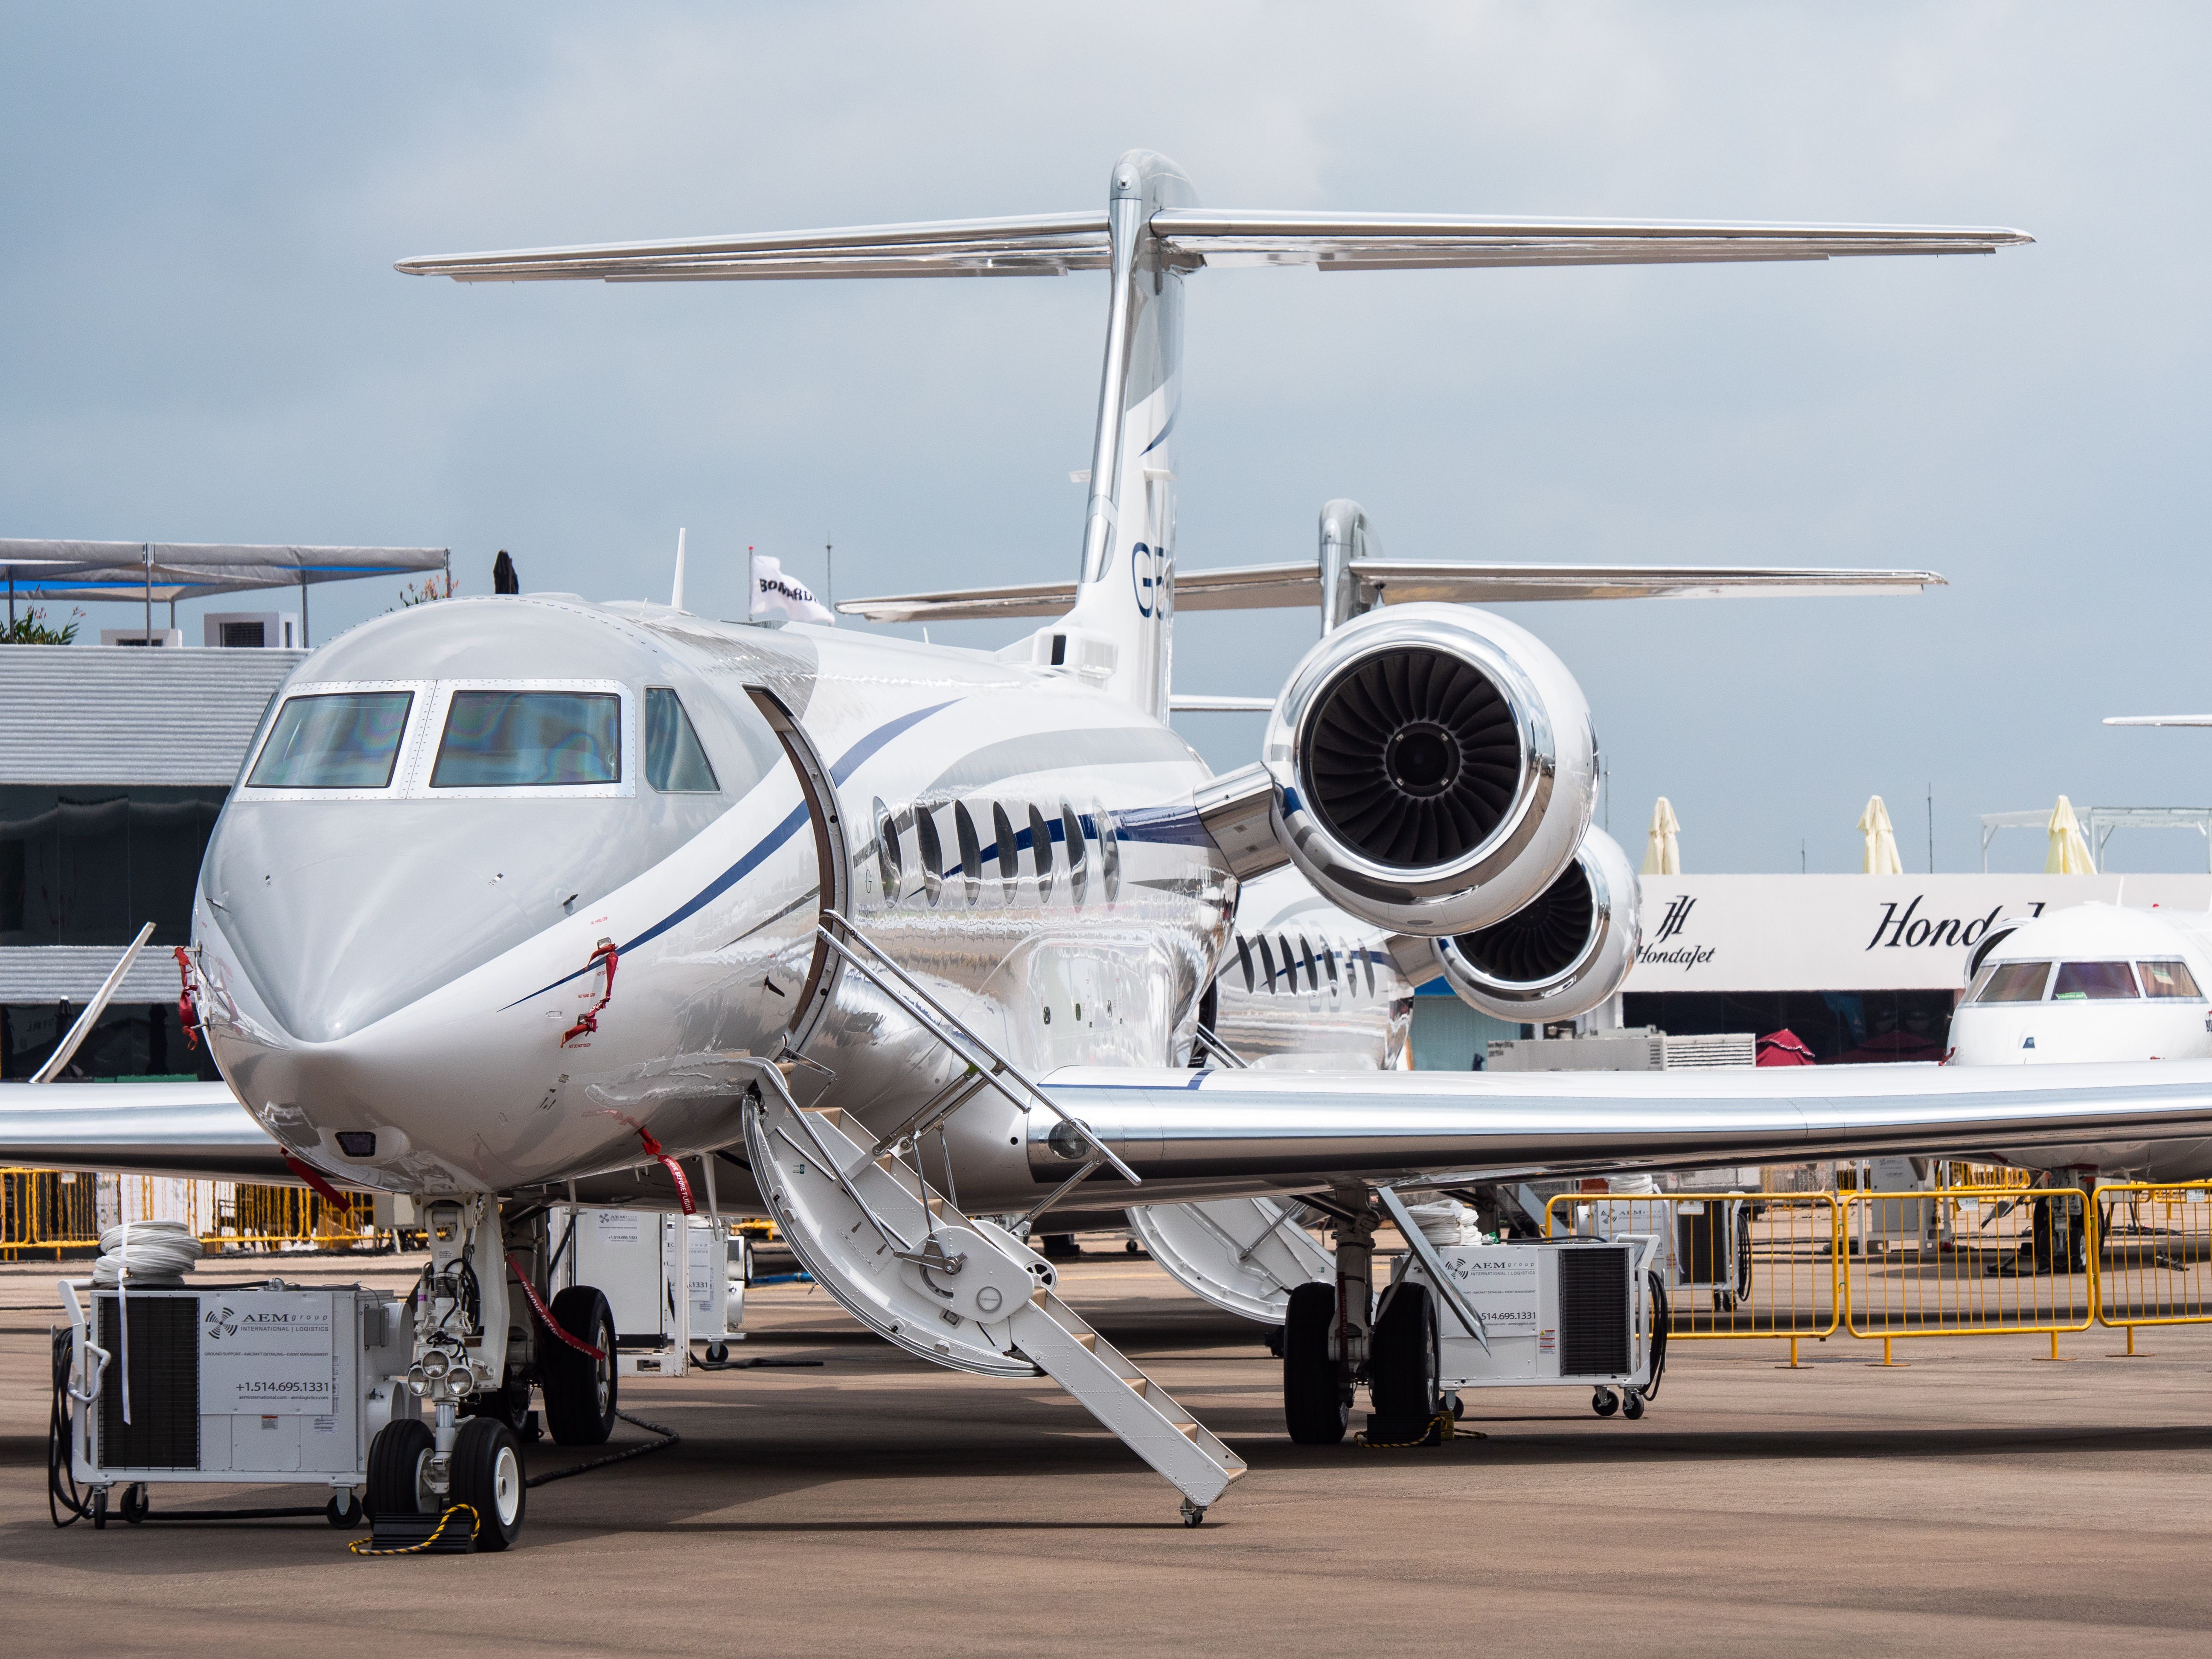 A Gulstream G550 parked at an airport.